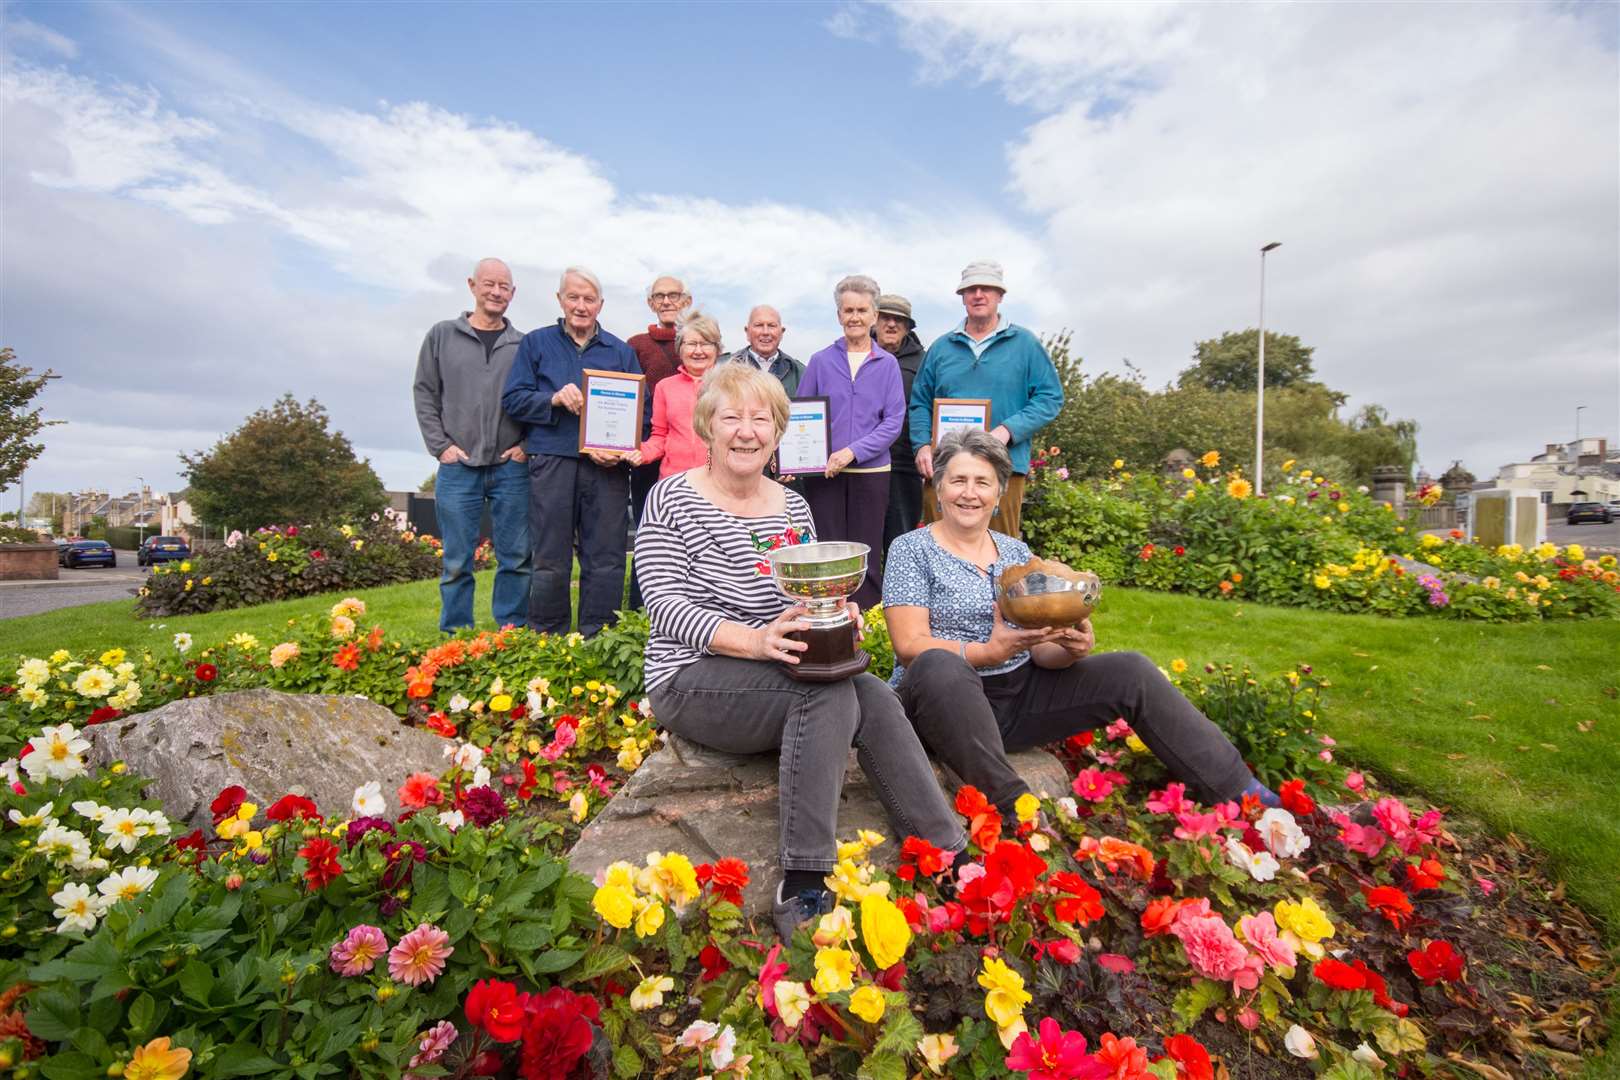 Forres in Bloom secretary Sandra Maclennan (left) and chairwoman Diane McGregor (right) and some of the other volunteers with their Beautiful Scotland awards.